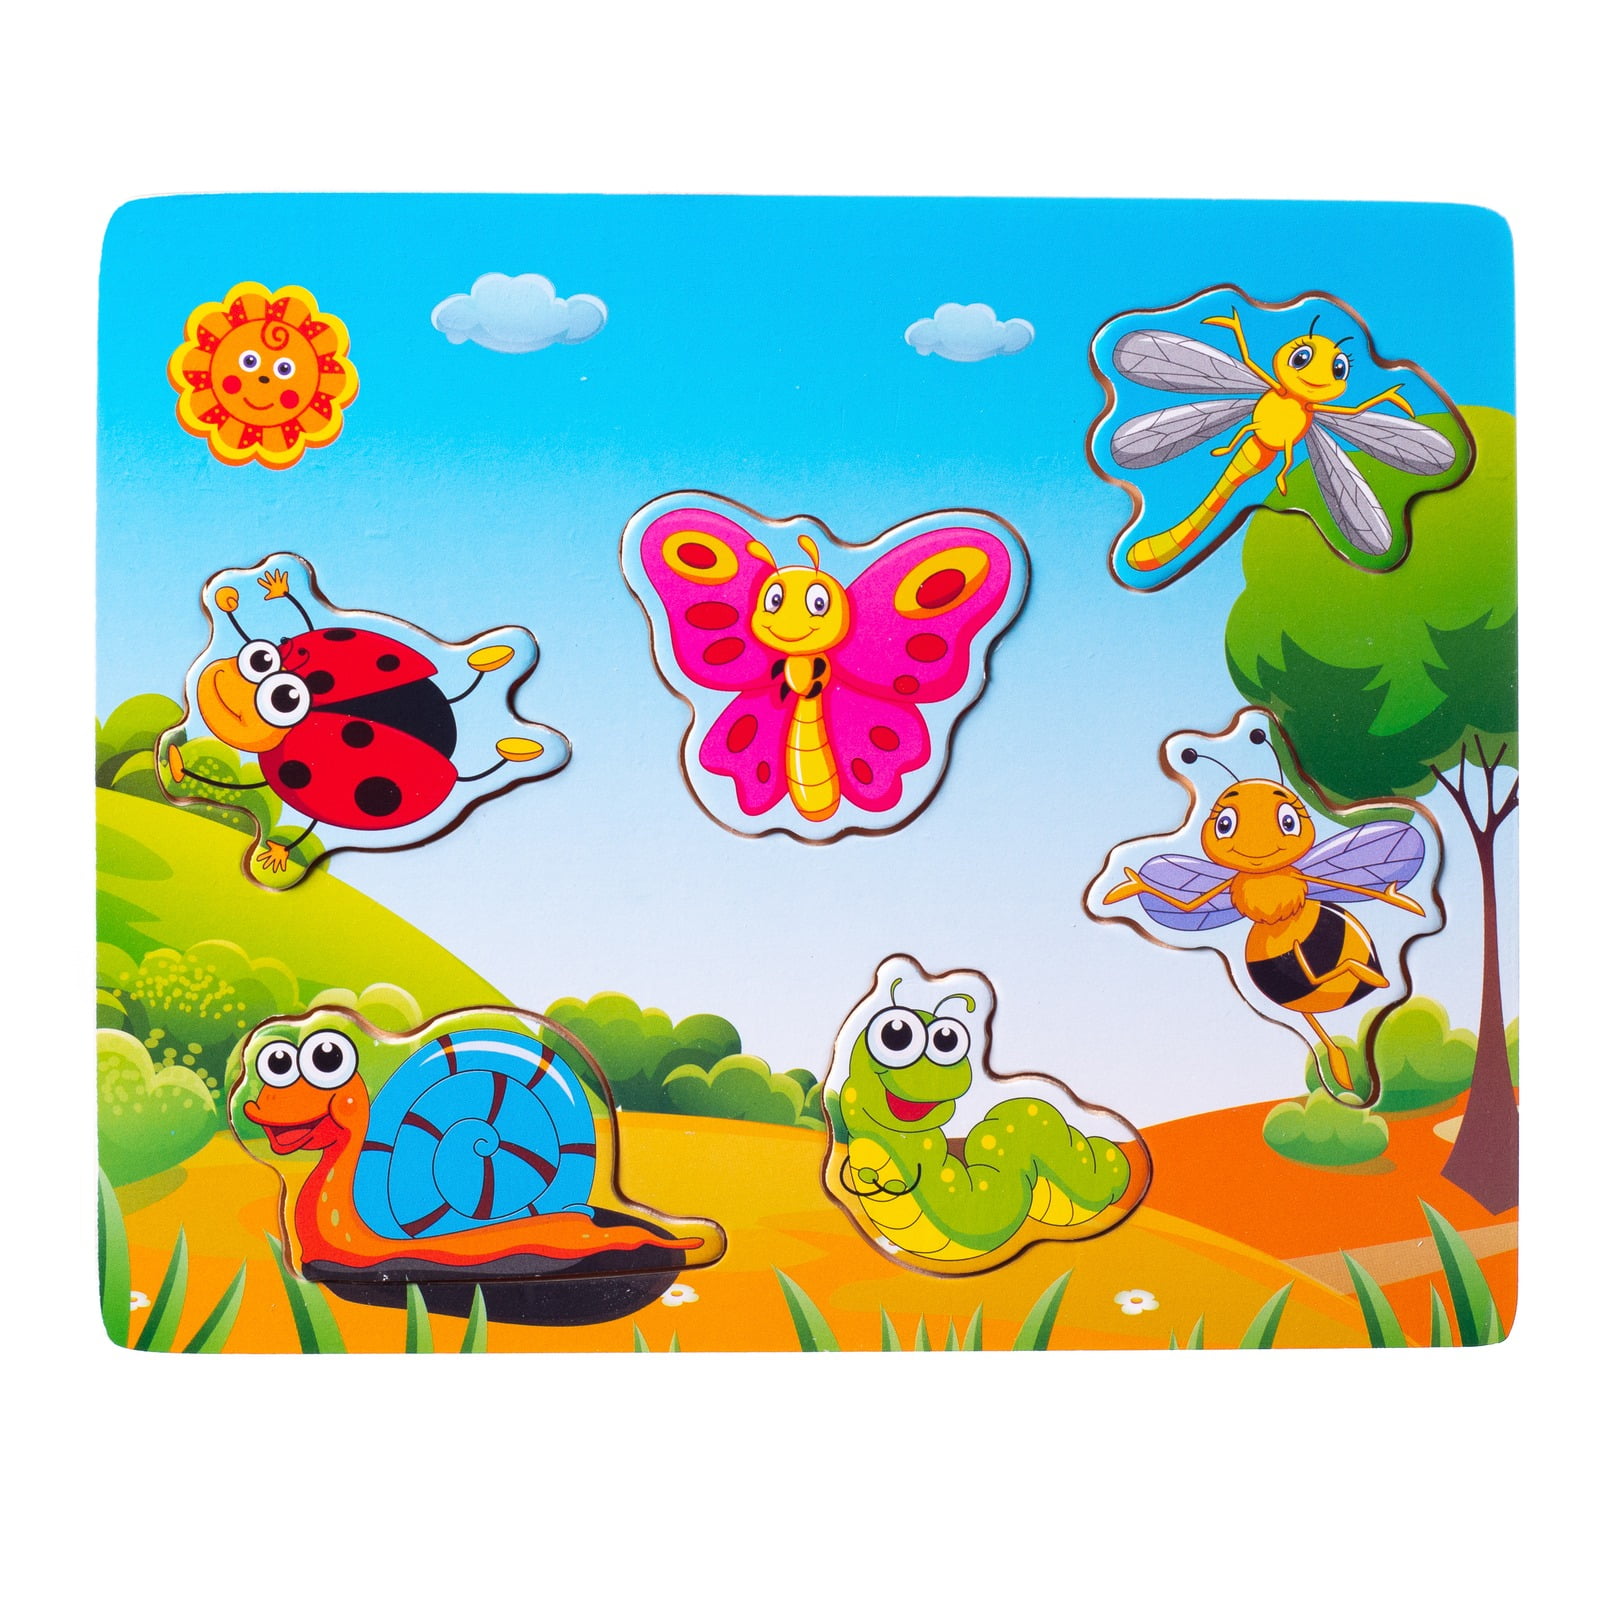 Eliiti Wooden Farm Animals Jigsaw Puzzle for Toddlers 2 to 4 Years Old Boy Girl 